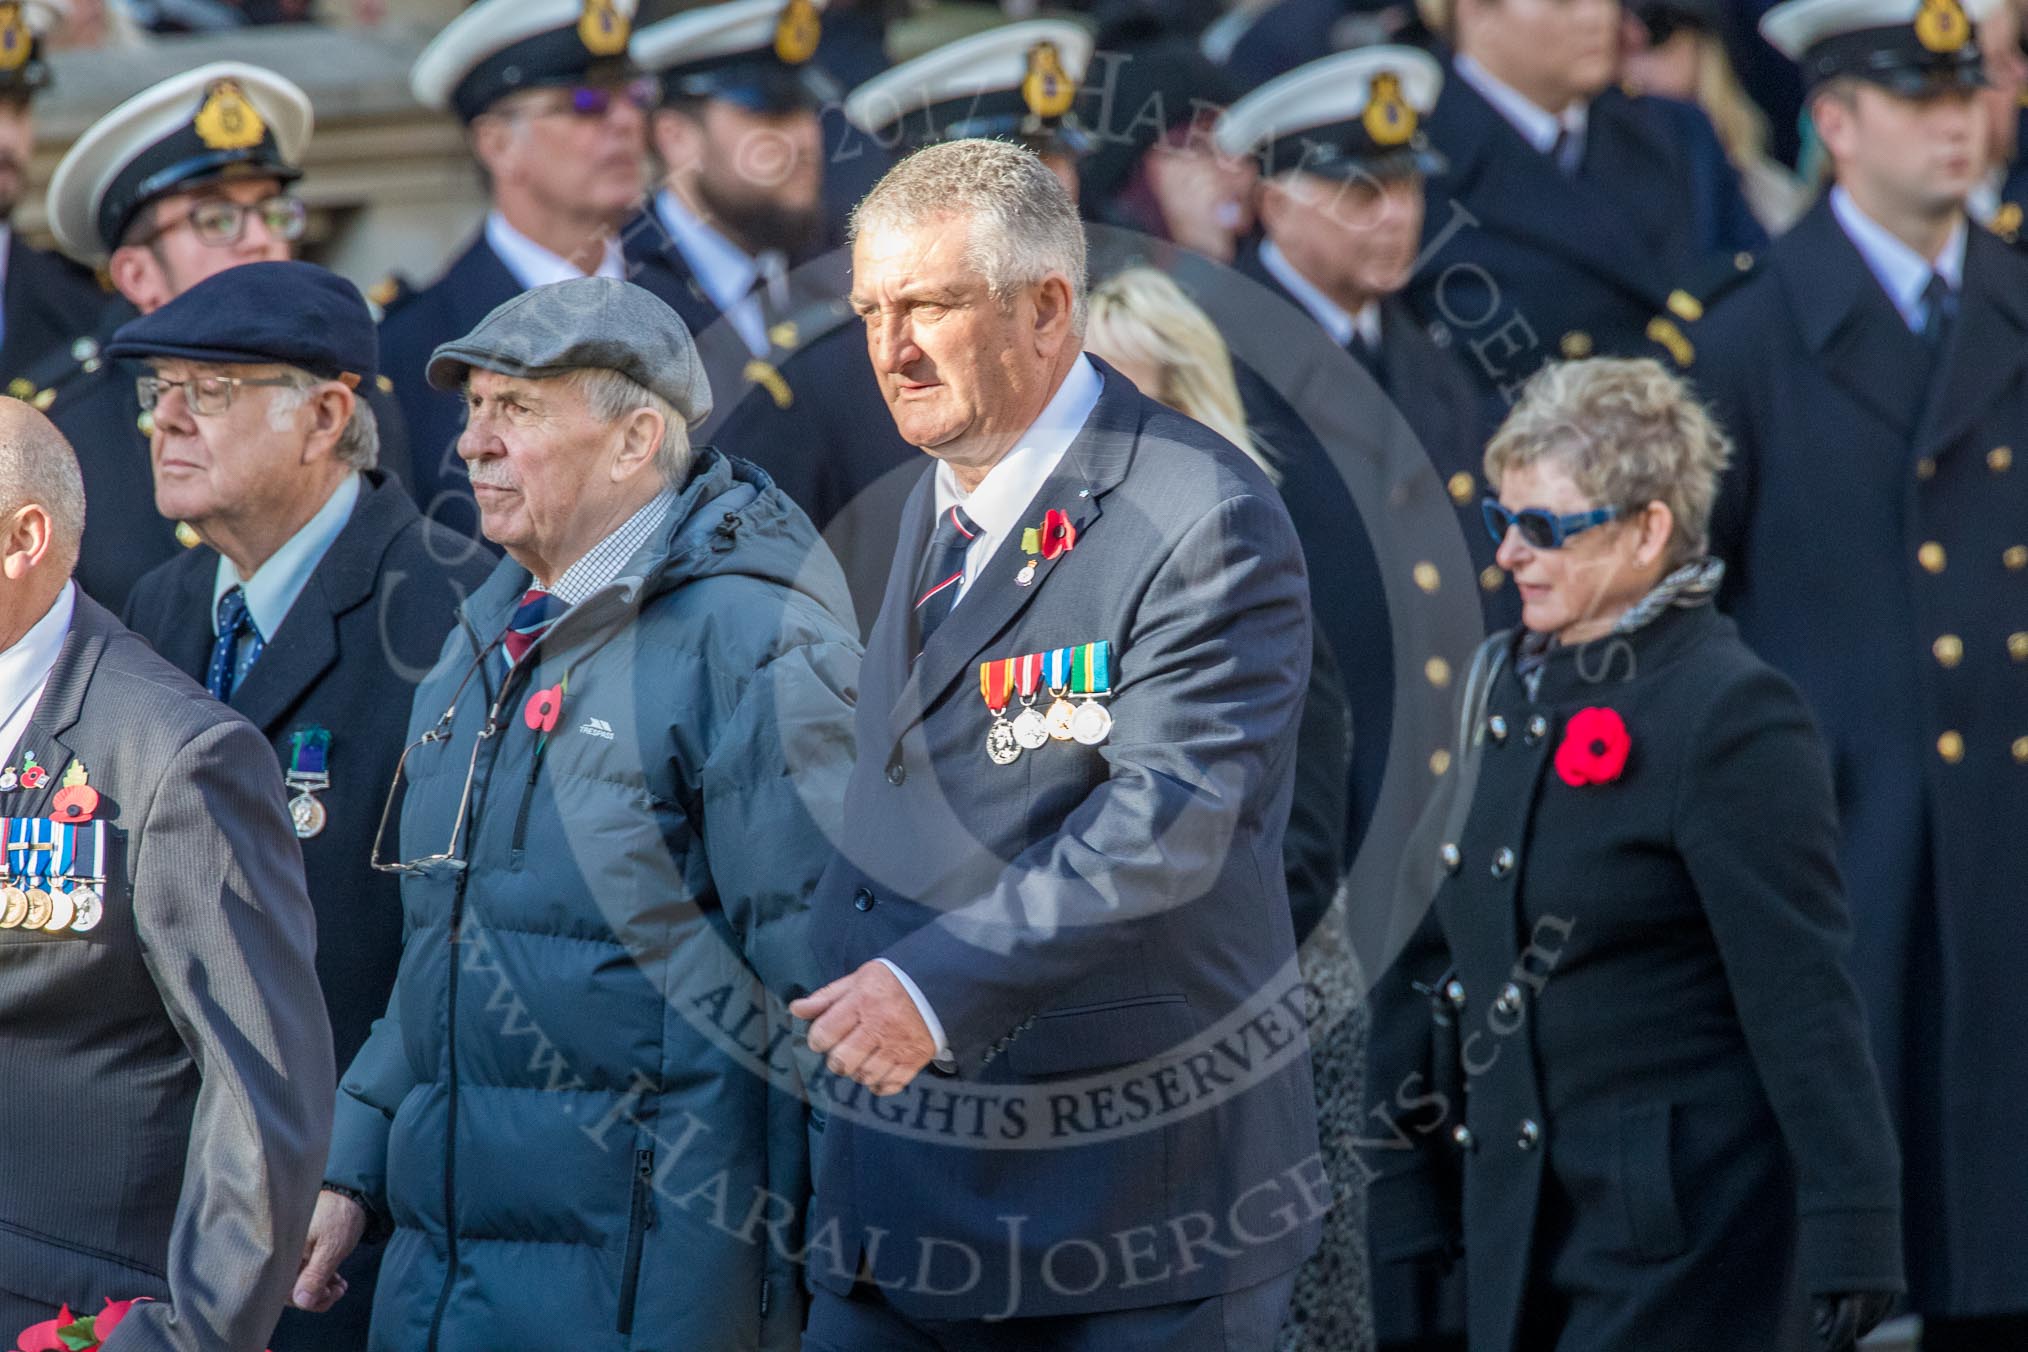 Union Jack Club (Group M46, 12 members) during the Royal British Legion March Past on Remembrance Sunday at the Cenotaph, Whitehall, Westminster, London, 11 November 2018, 12:31.